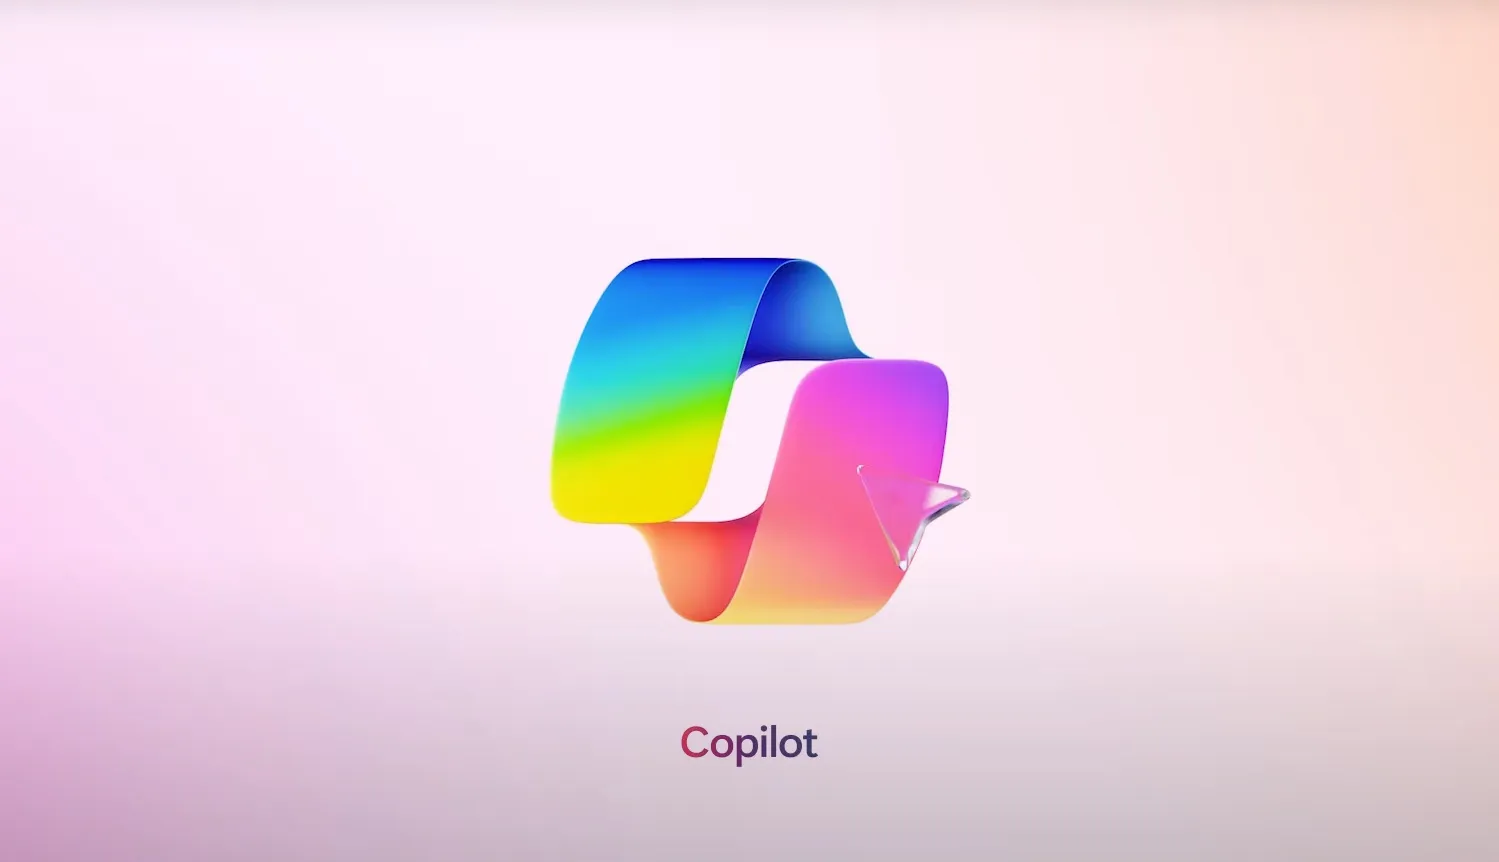 Colorful 3D Copilot logo with gradient ribbons on pink background.